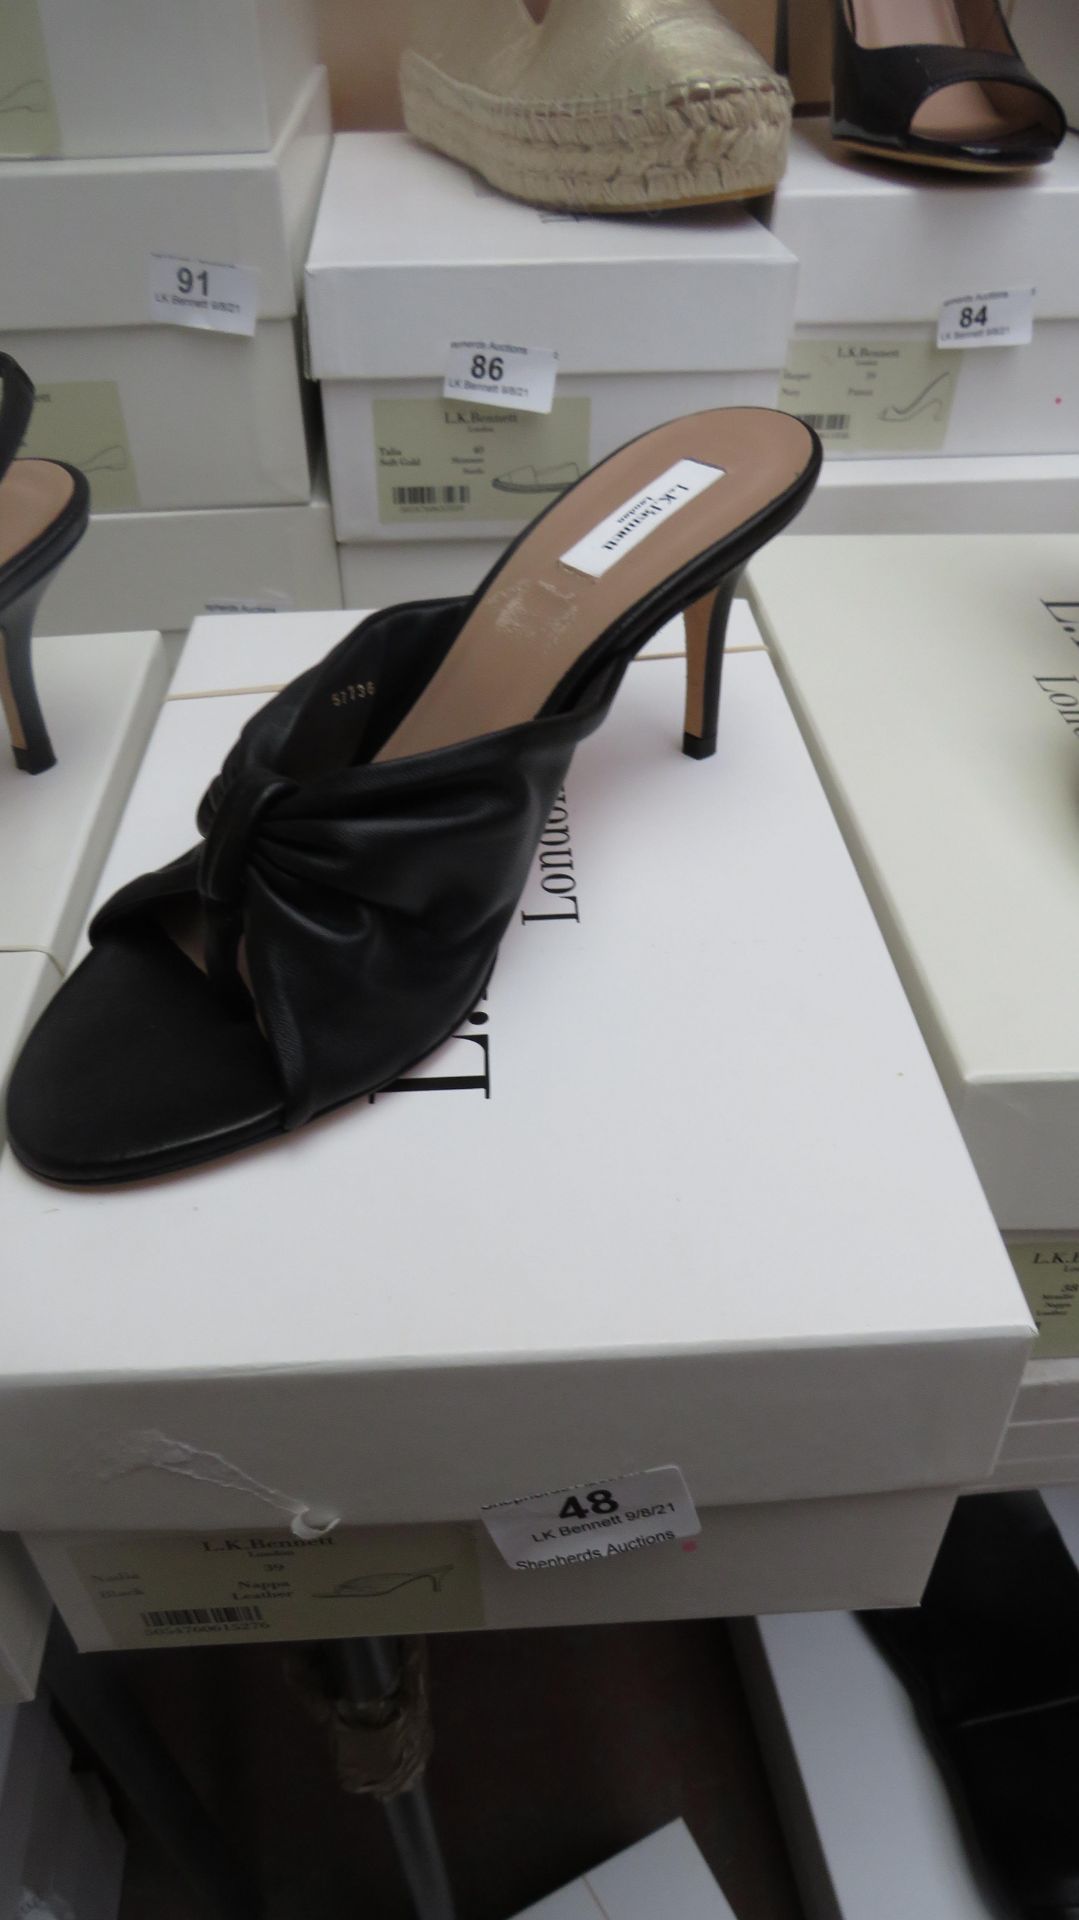 L K Bennett London Nadia Black Nappa Leather Shoes size 39 RRP £225 new & boxed see image for